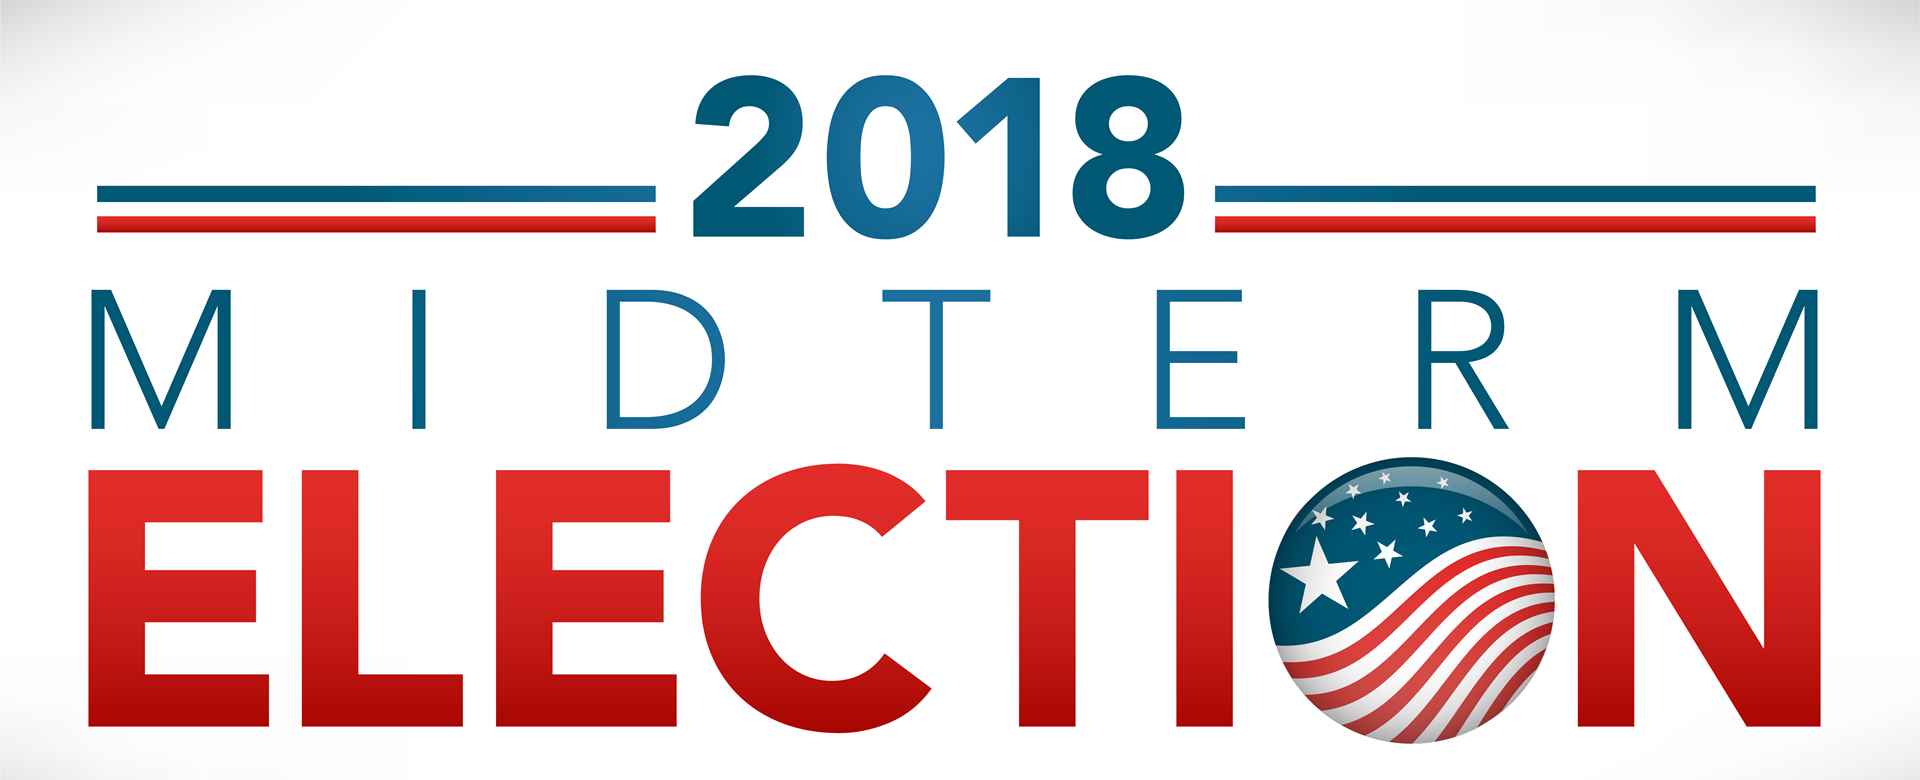 The 2018 Midterm Election and Healthcare Coverage Results